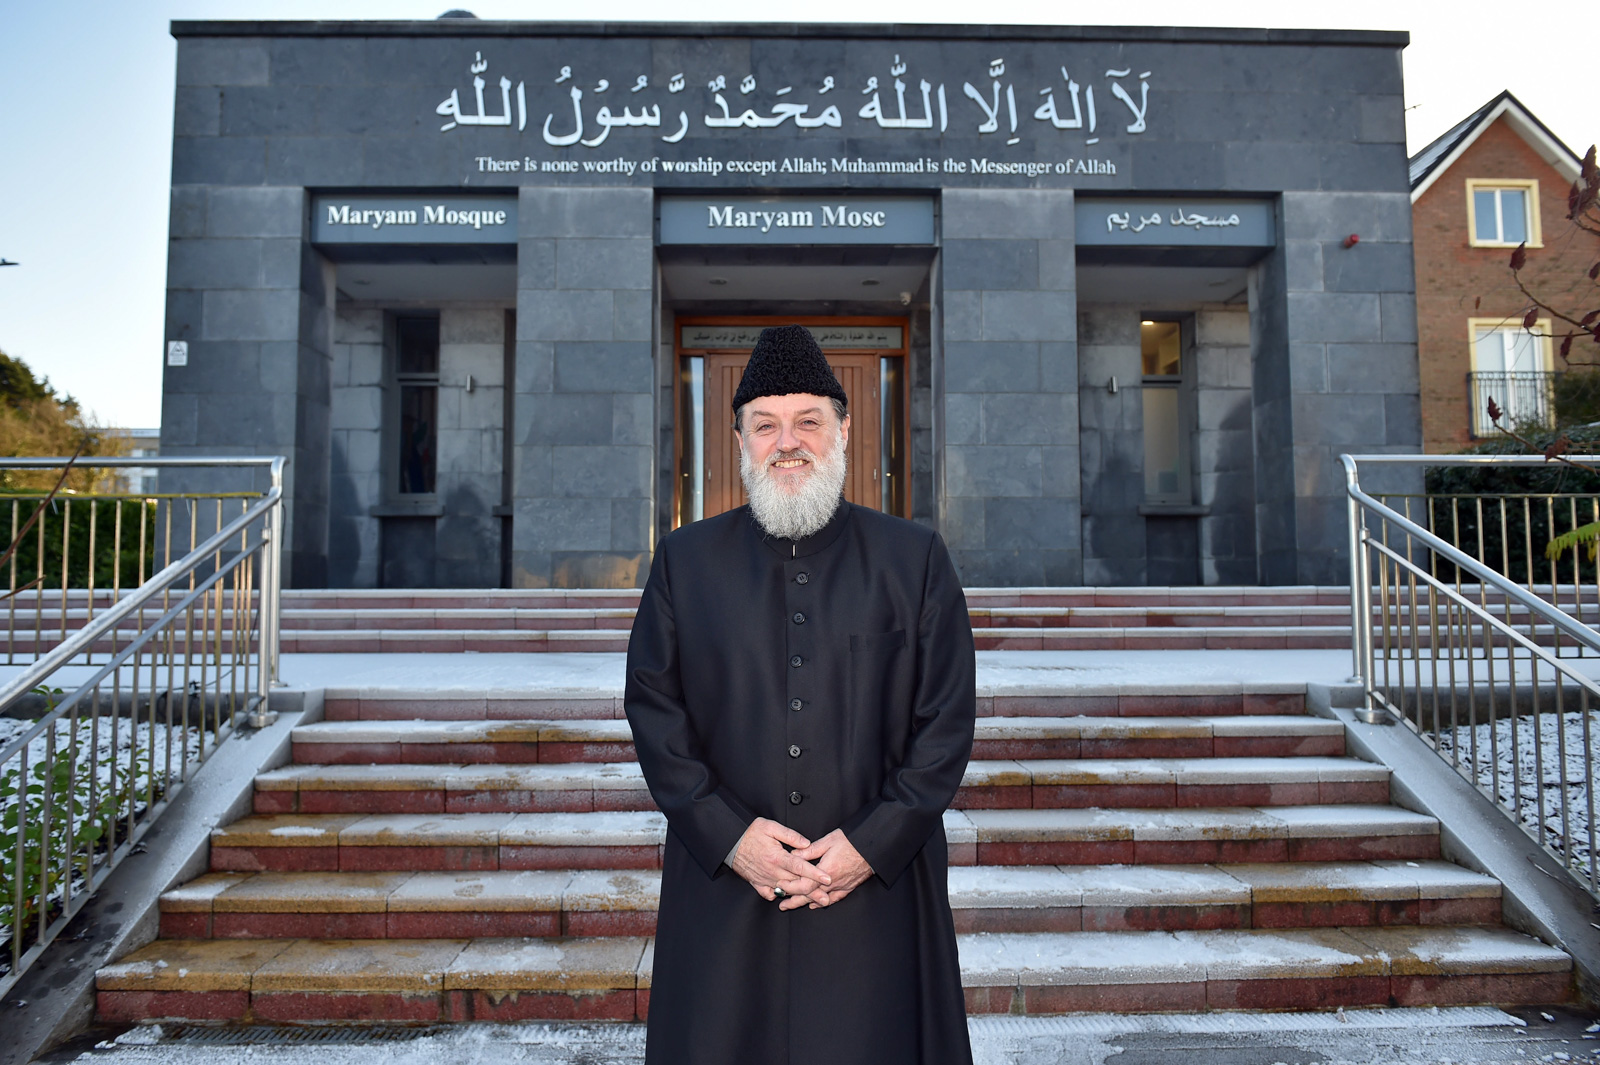 The imam of Galway poses for a photo outside the entrance of the Maryam Mosque in Galway, Ireland. Ibrahim Michael Noonan